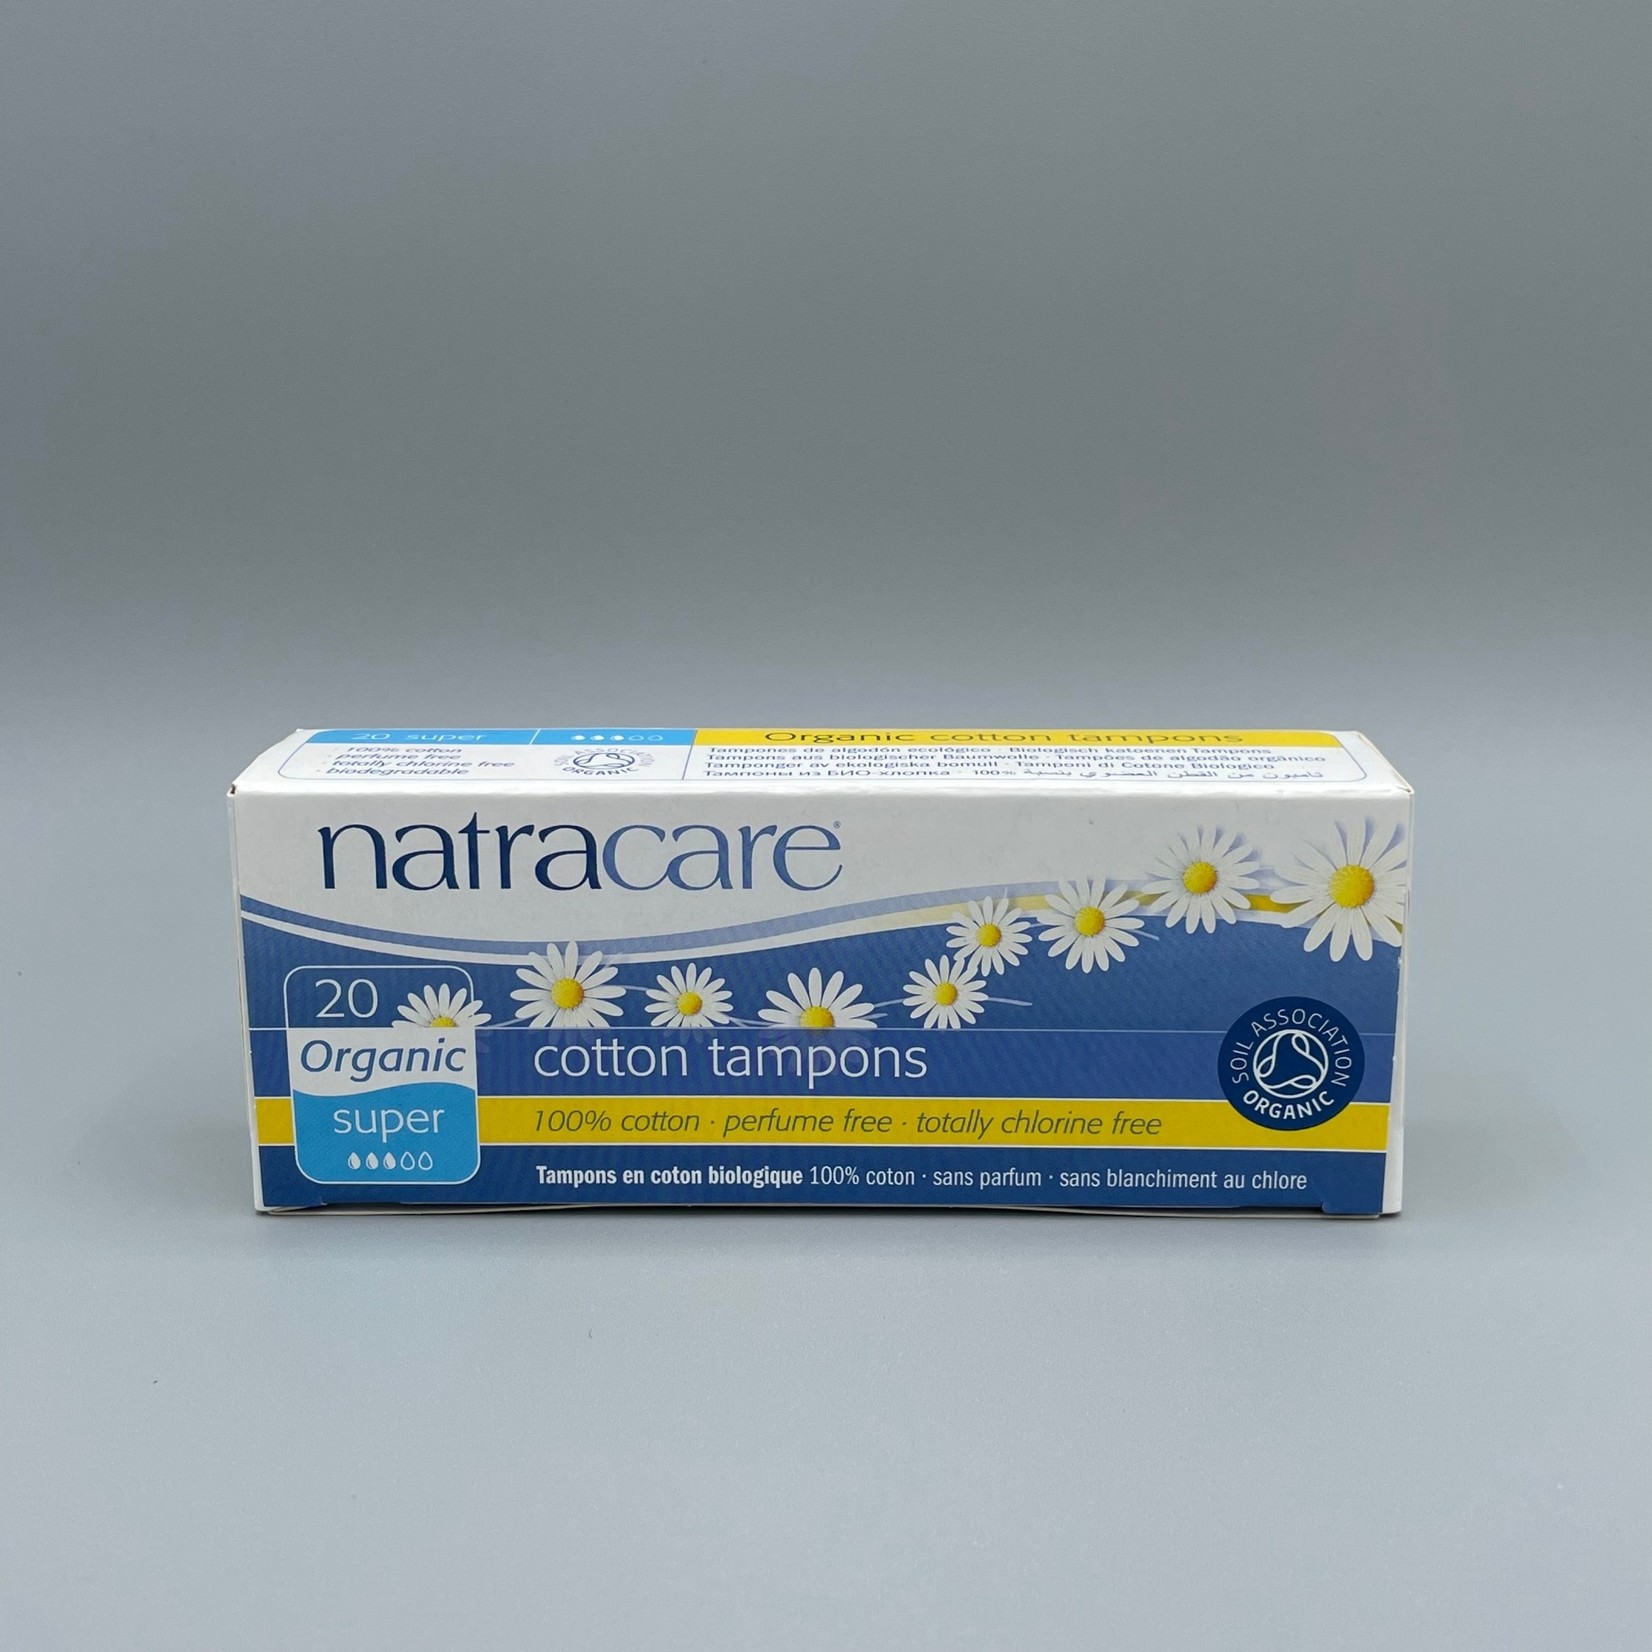 Natracare Cotton Tampons (20 count)